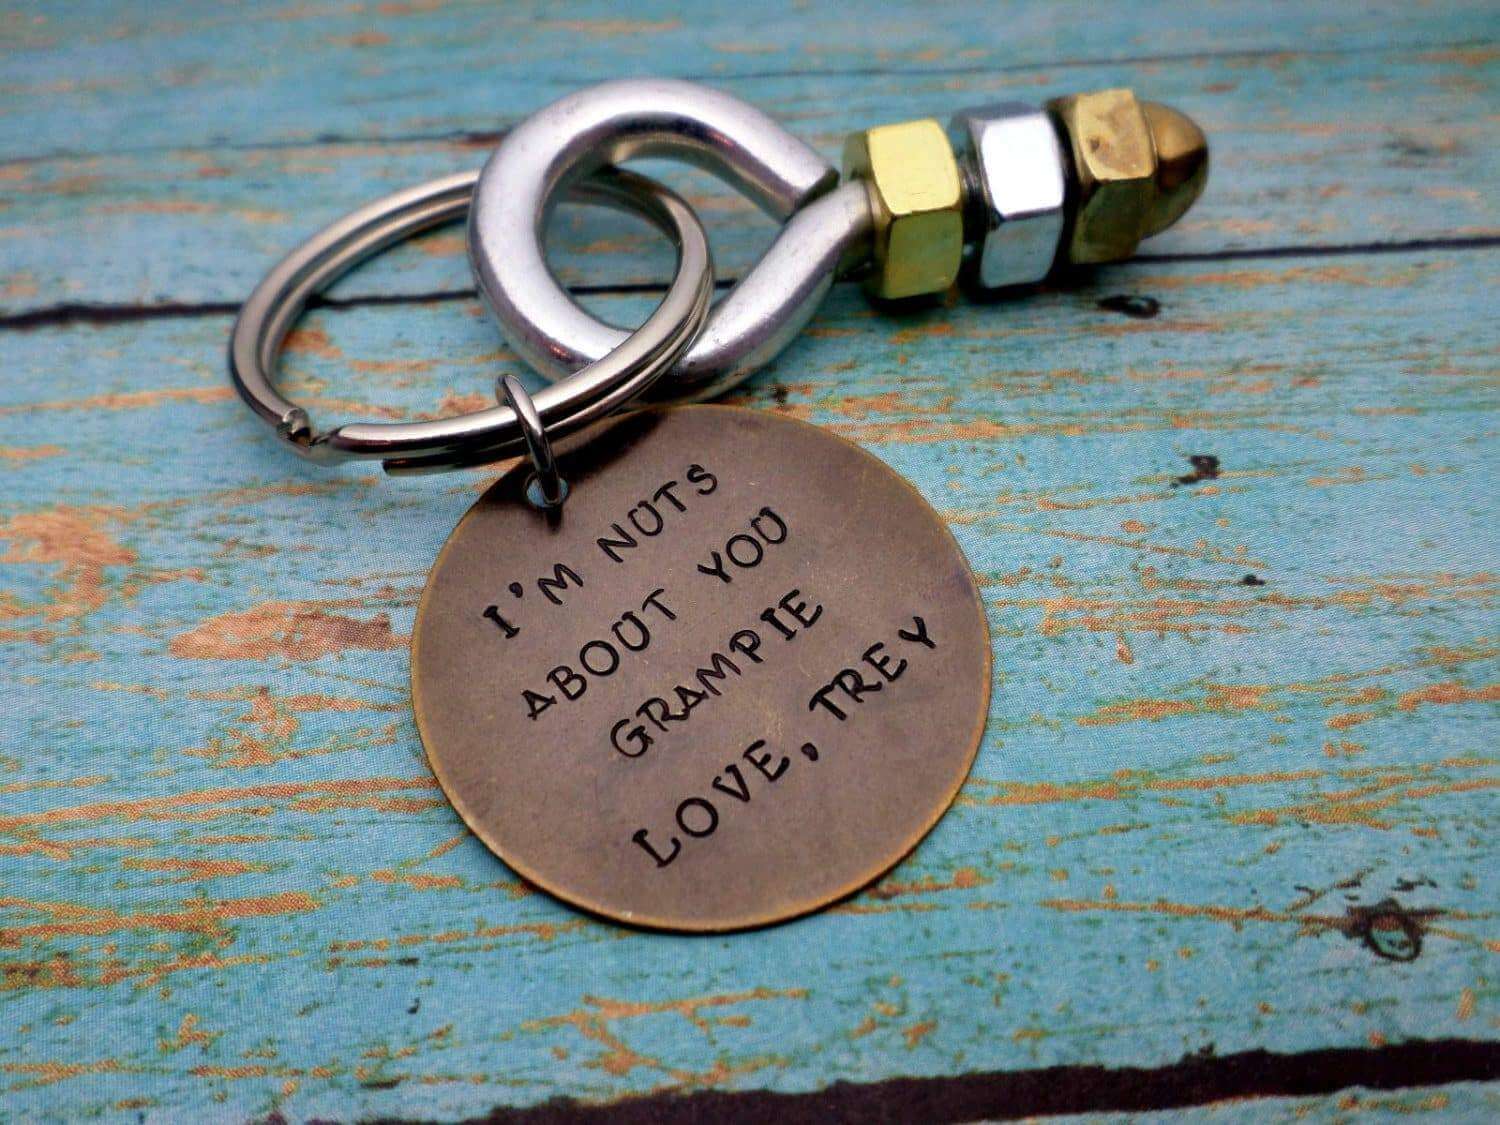 Father's Day Gift, Grandfather Gift, I'm Nuts About You, Dad Gift, Keychain Gift, Nuts and Bolts, Keychains, HandmadeLoveStories, HandmadeLoveStories , [Handmade_Love_Stories], [Hand_Stamped_Jewelry], [Etsy_Stamped_Jewelry], [Etsy_Jewelry]